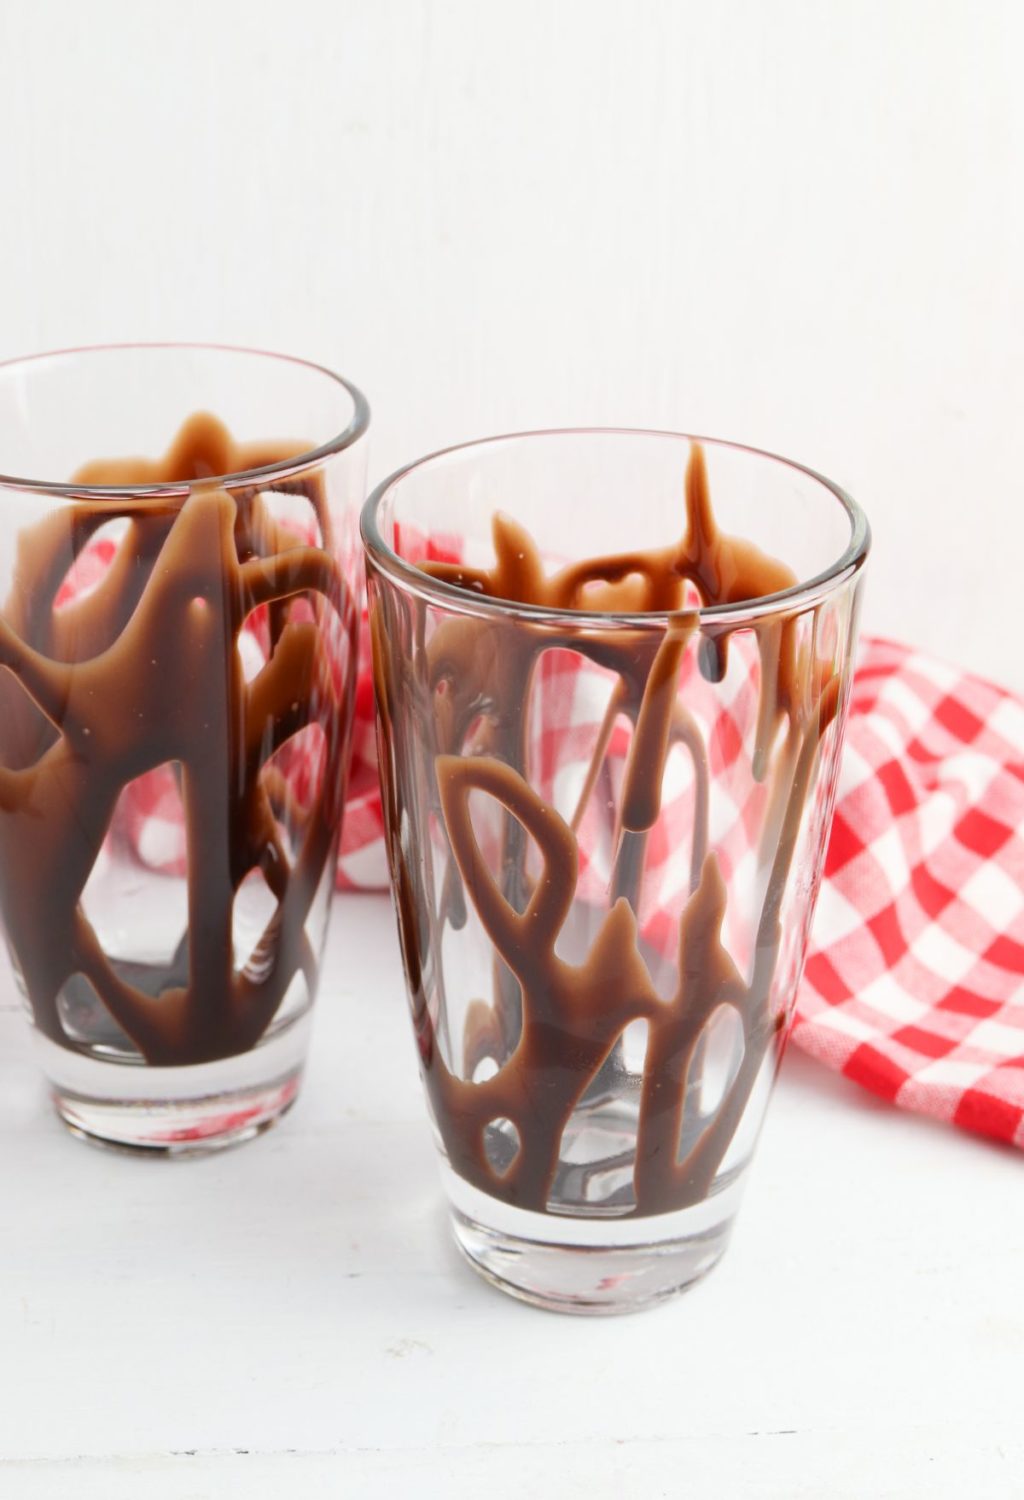 Two glasses with chocolate sauce on a red and white checkered cloth.